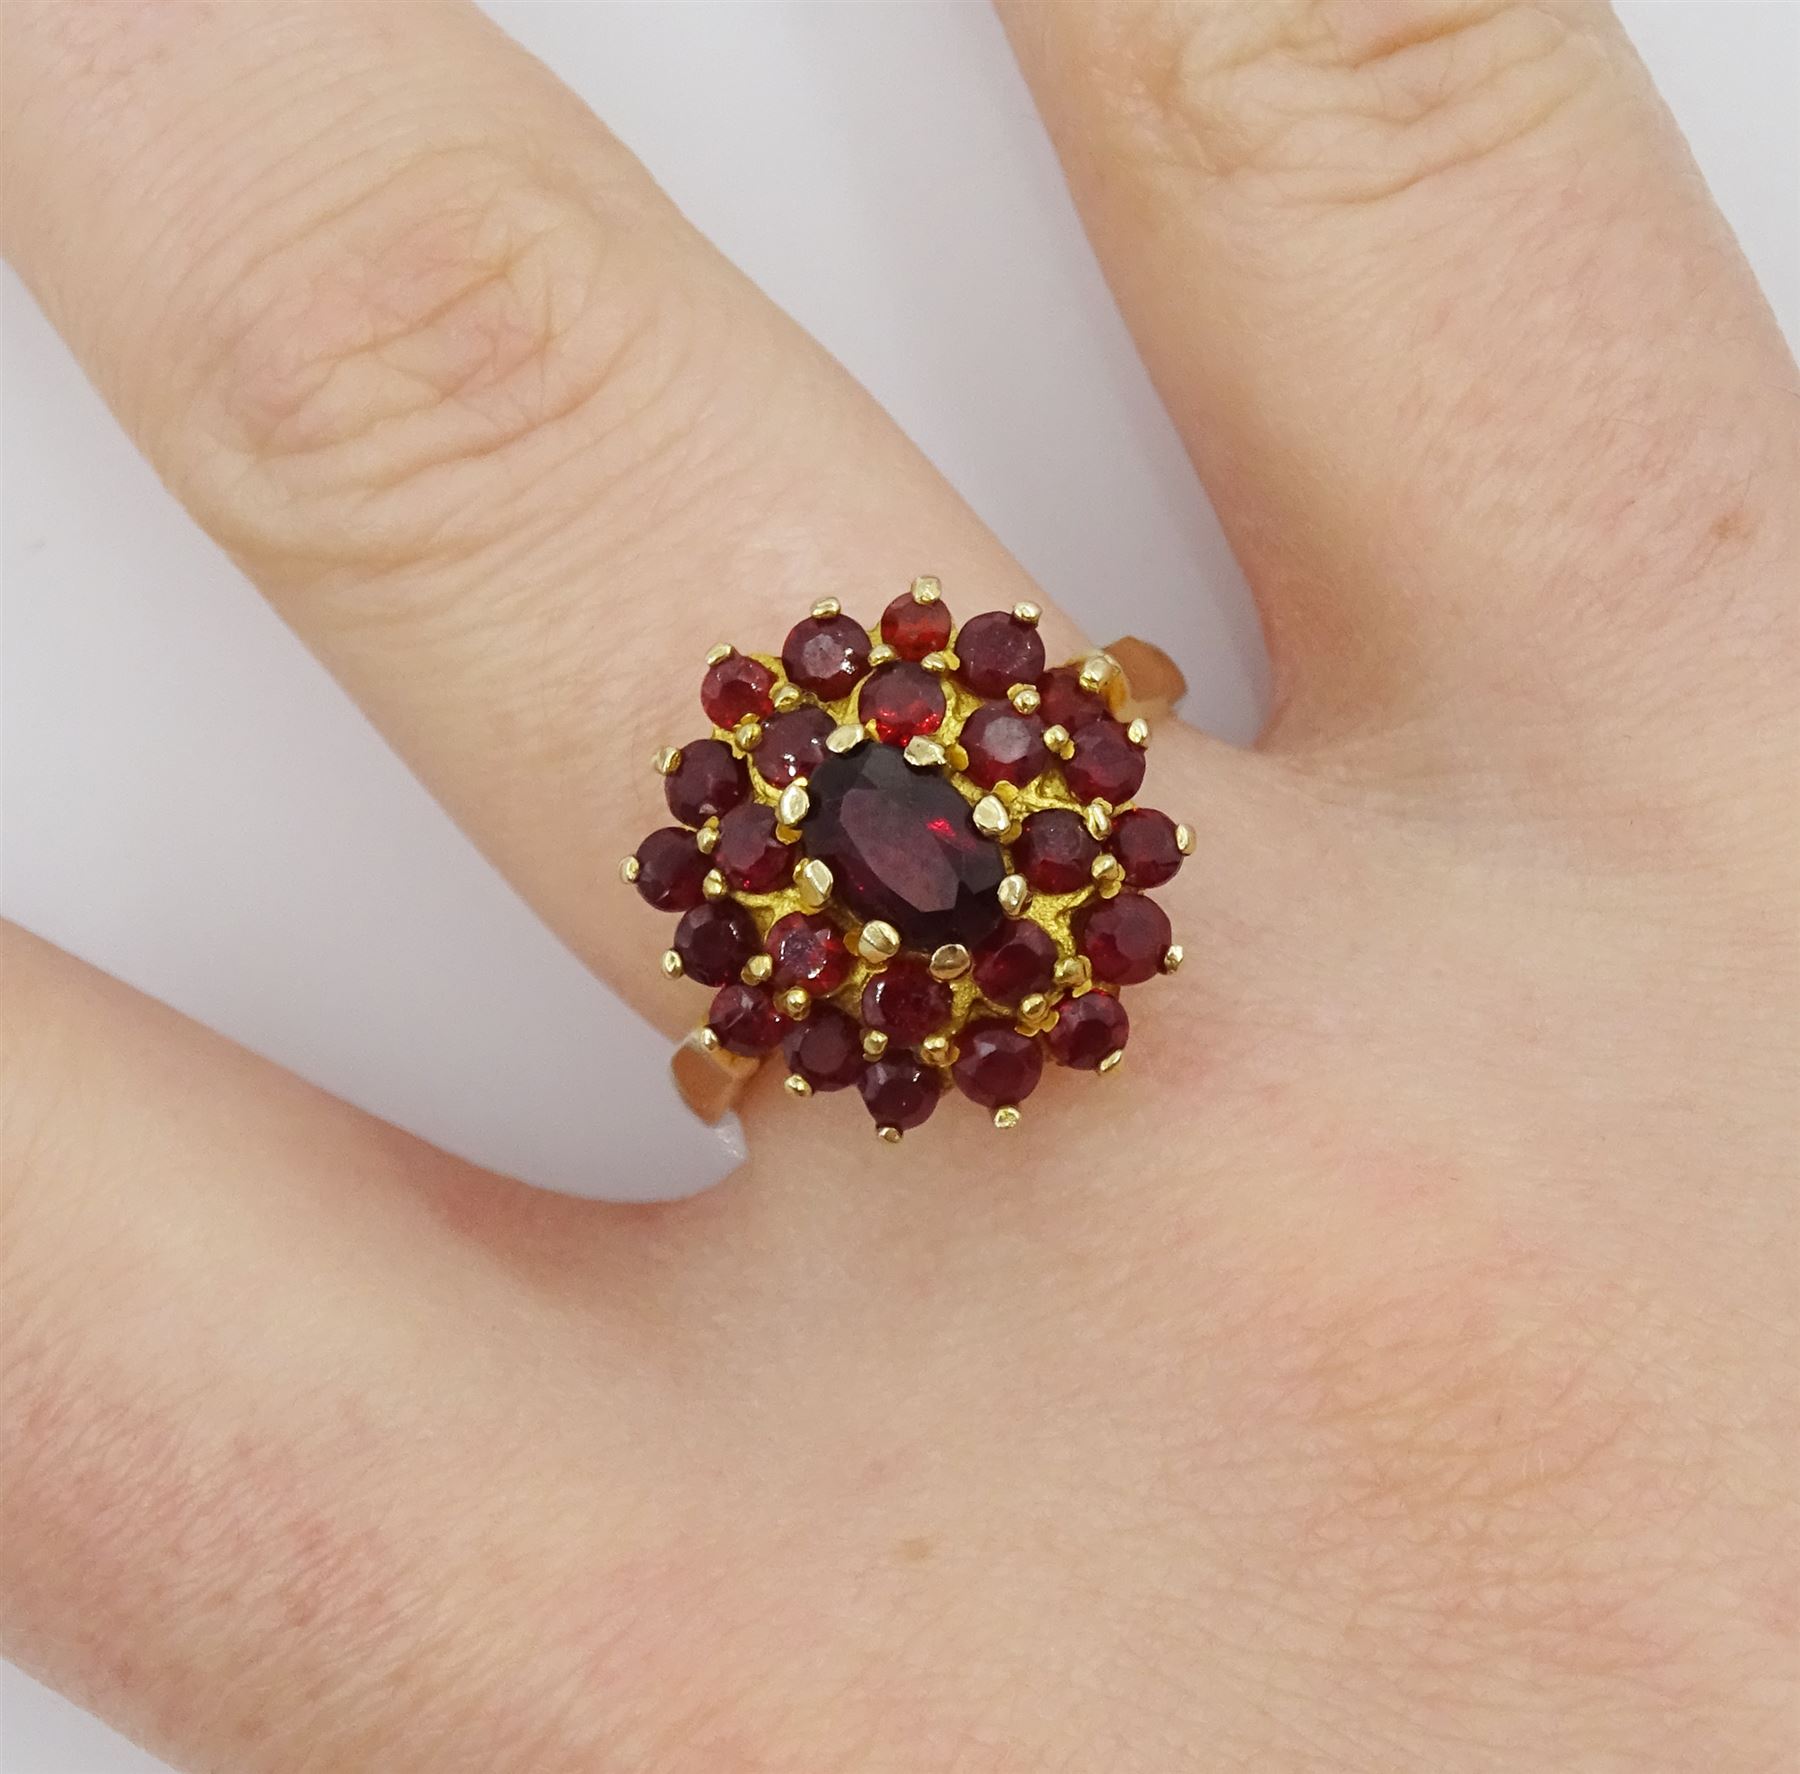 Gold oval and round garnet cluster ring - Image 2 of 4